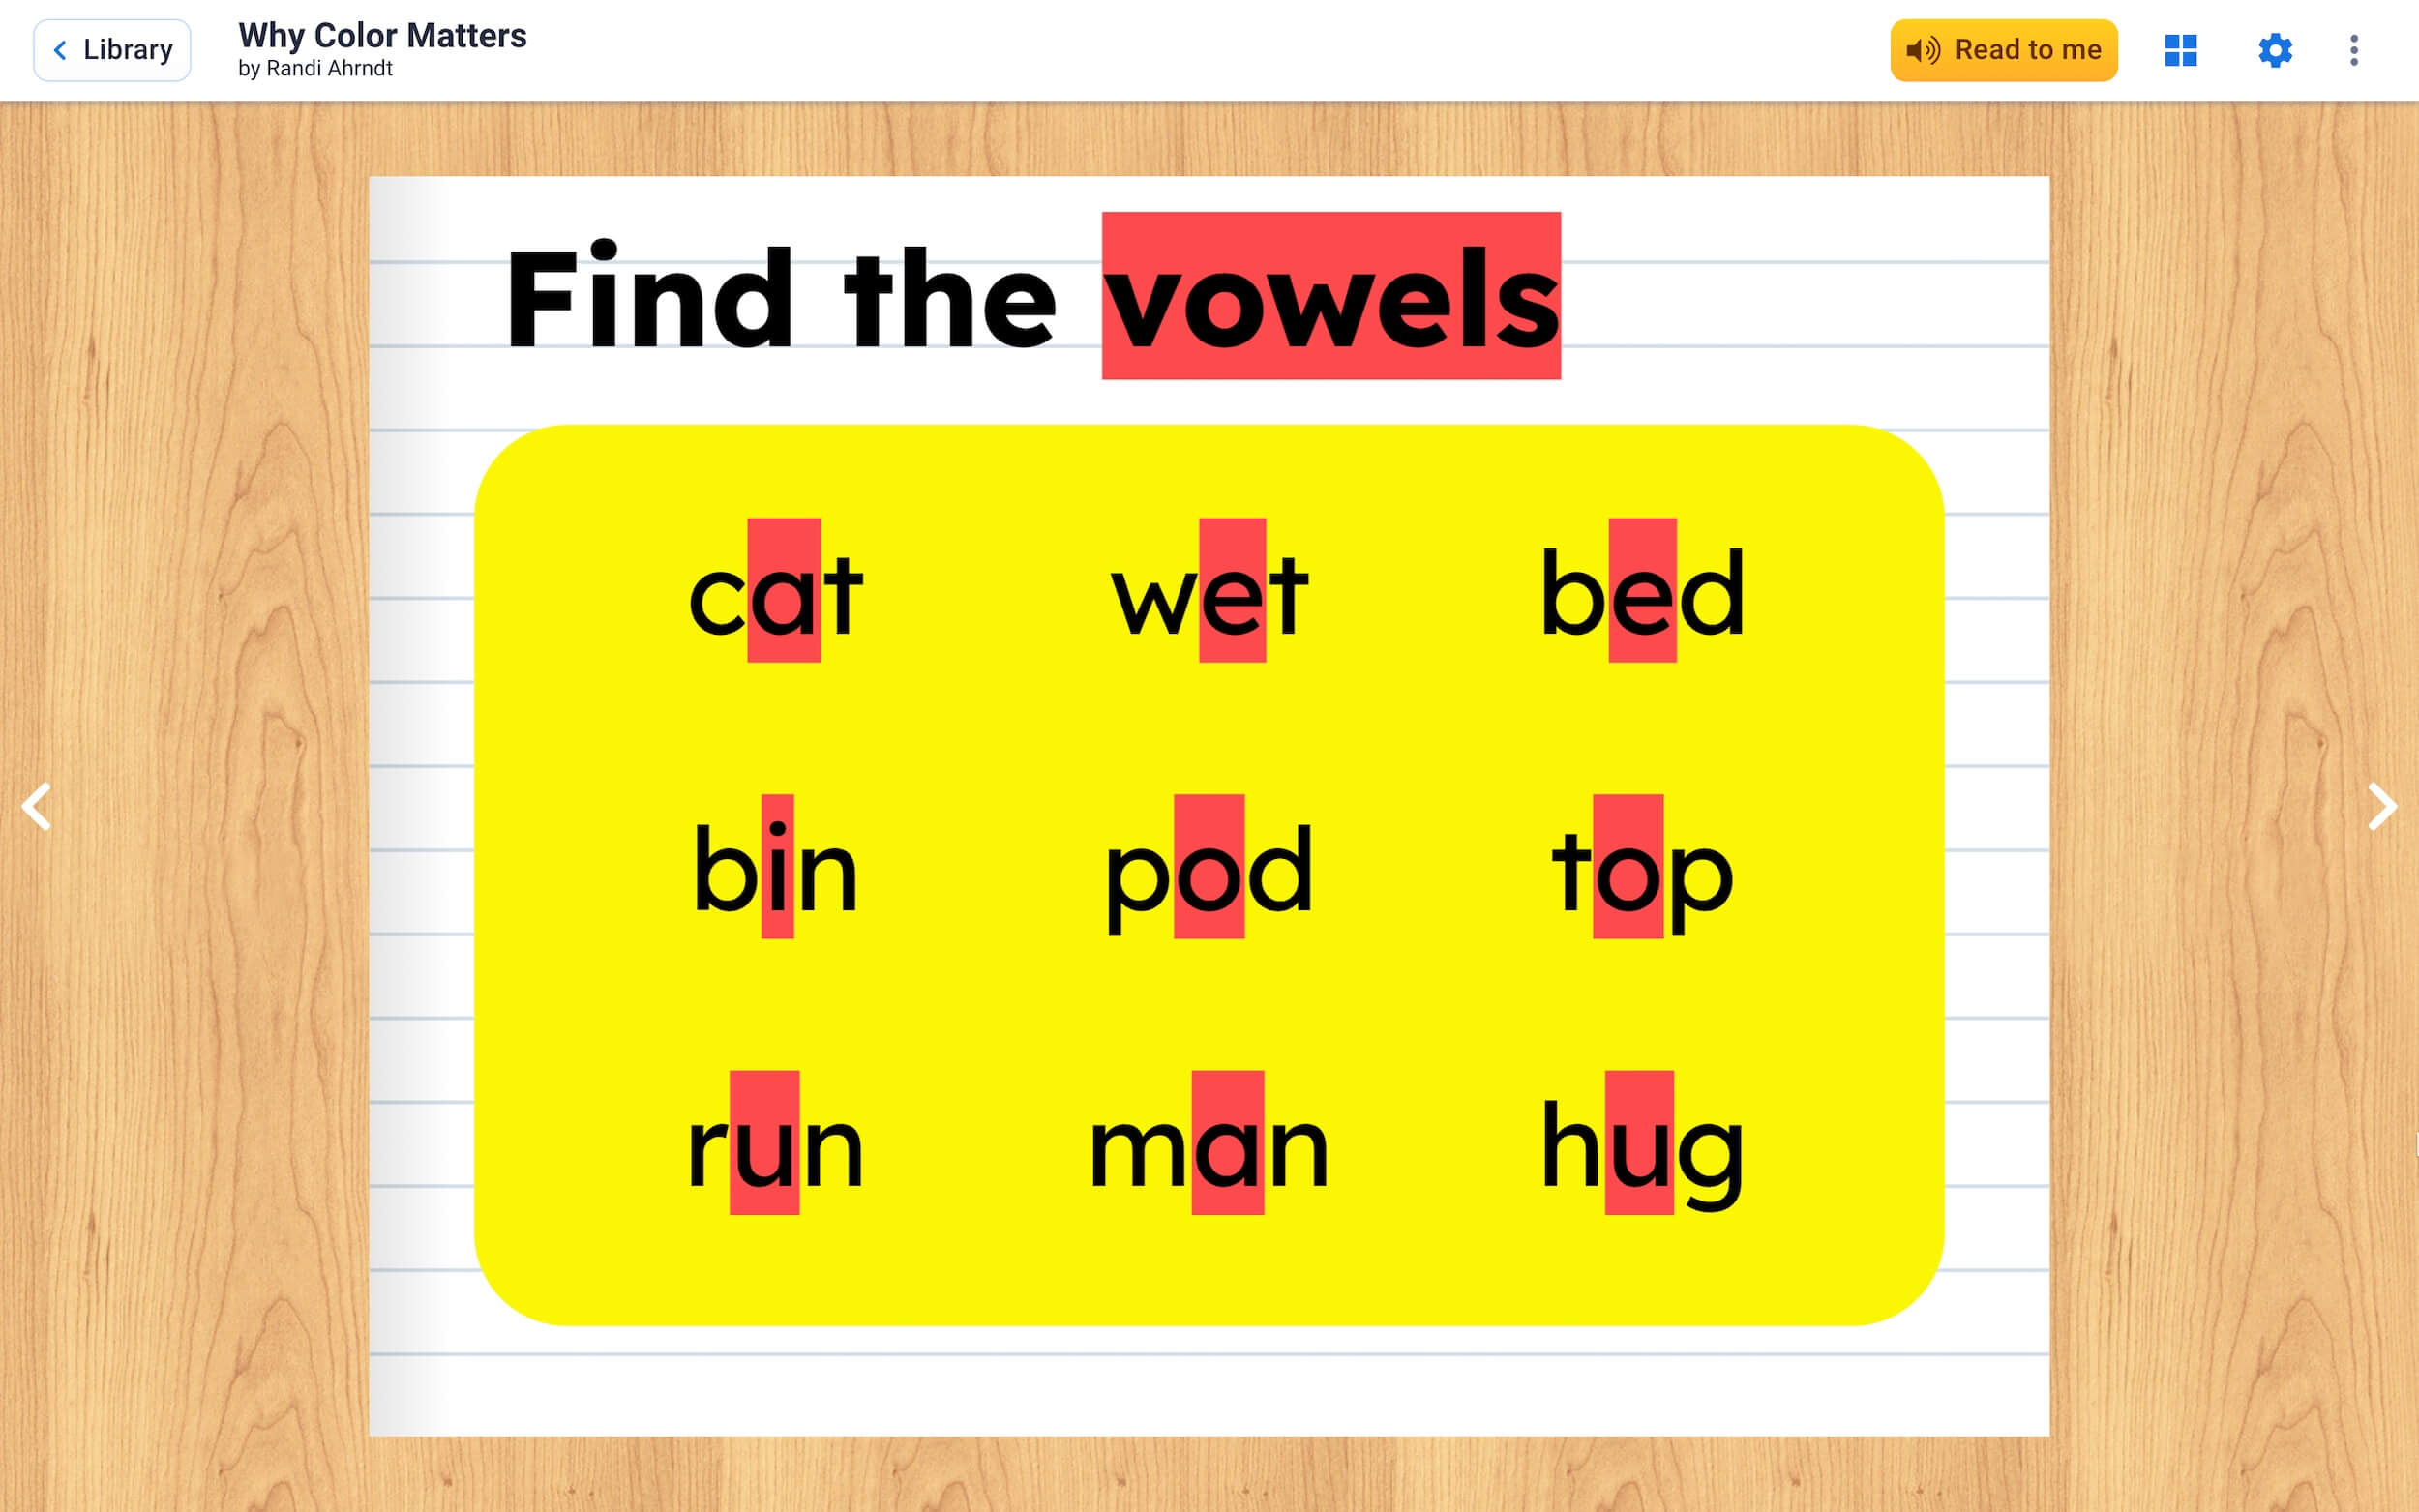 Find the vowels example